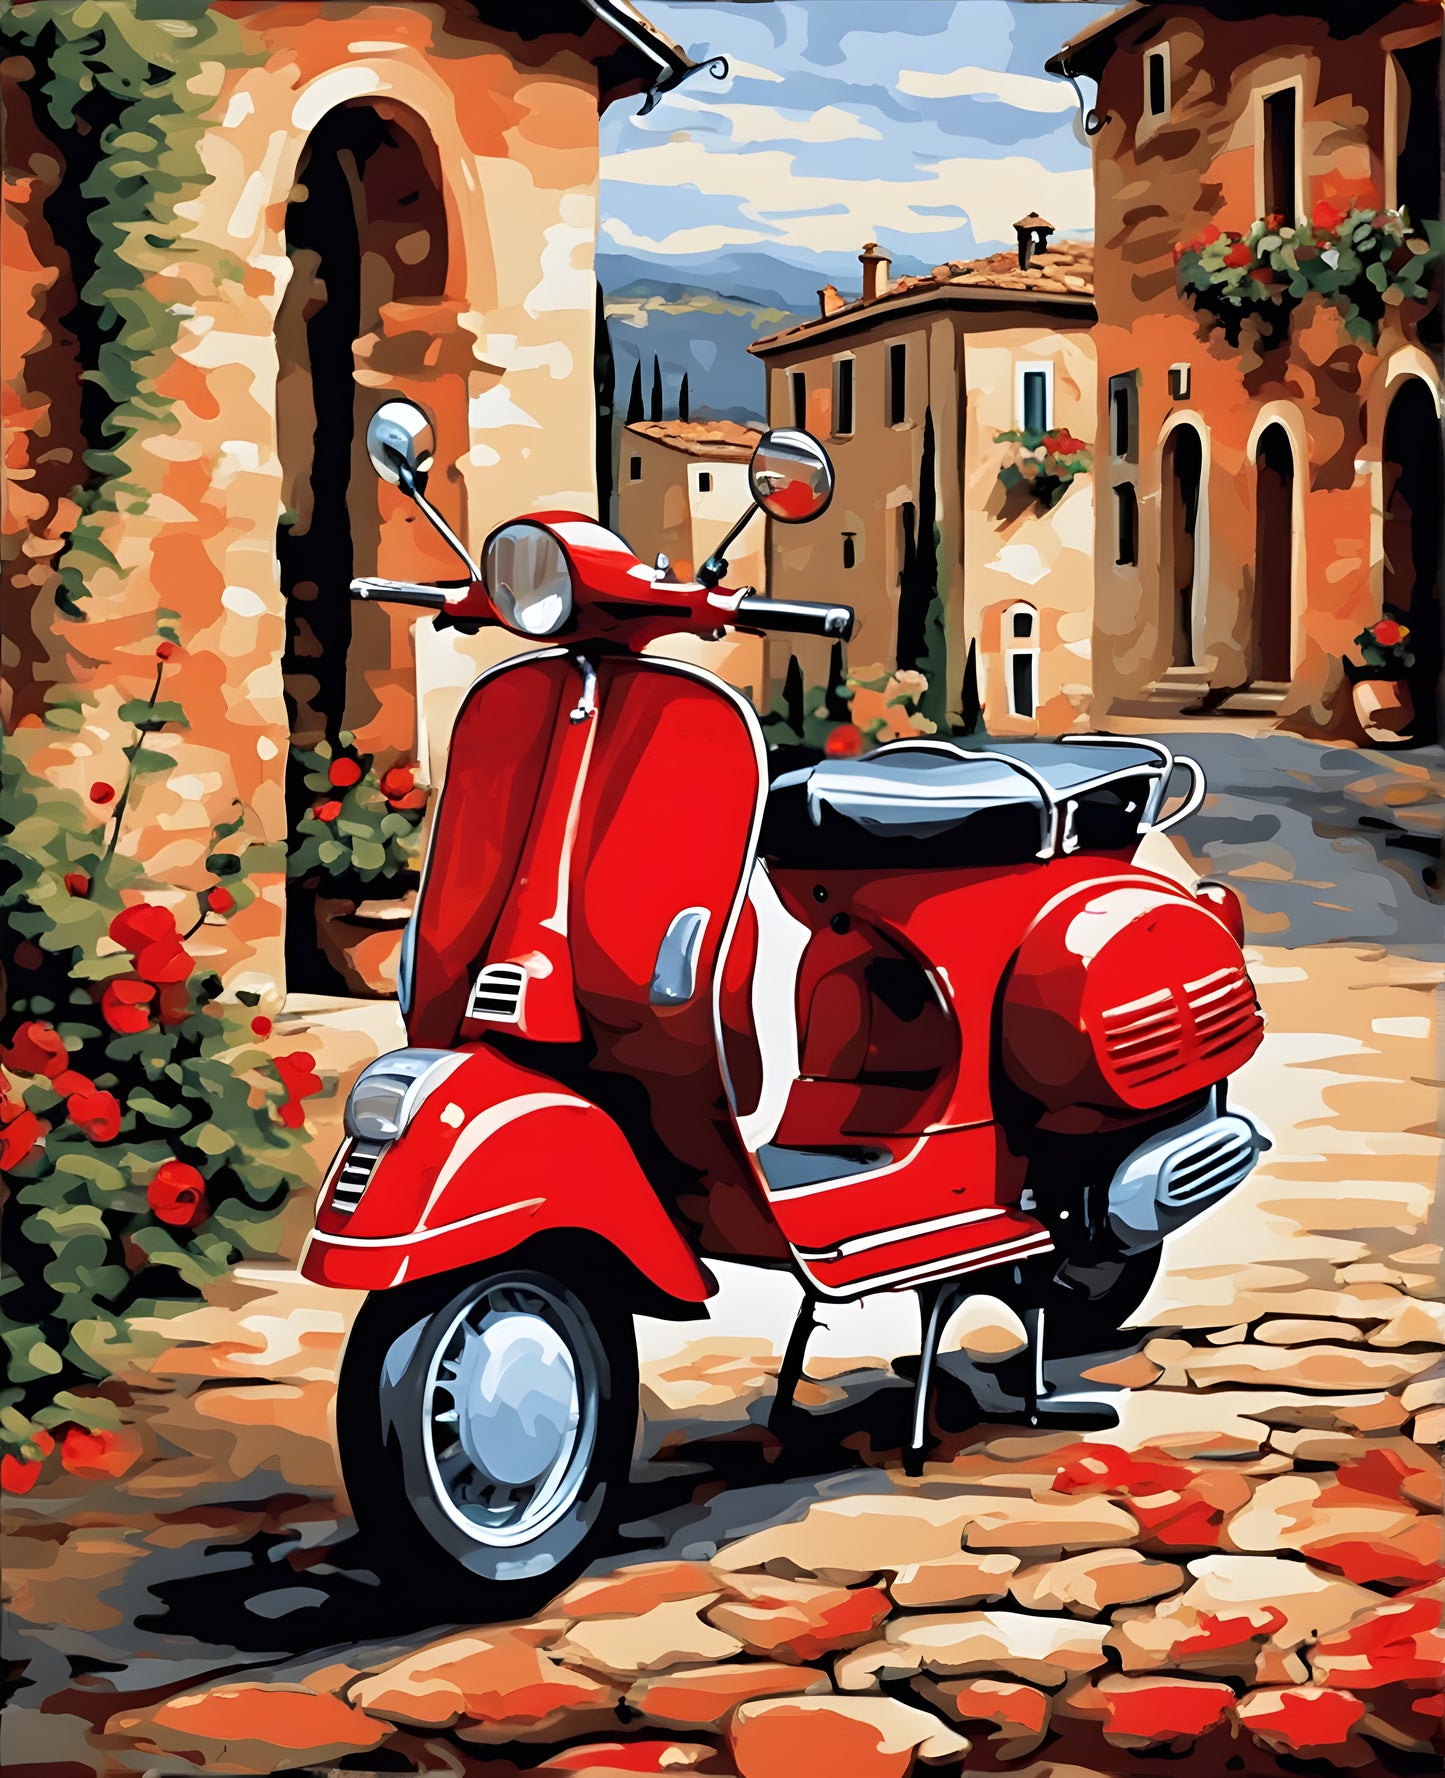 Red Vespa in Tuscany Landscape (5) - Van-Go Paint-By-Number Kit